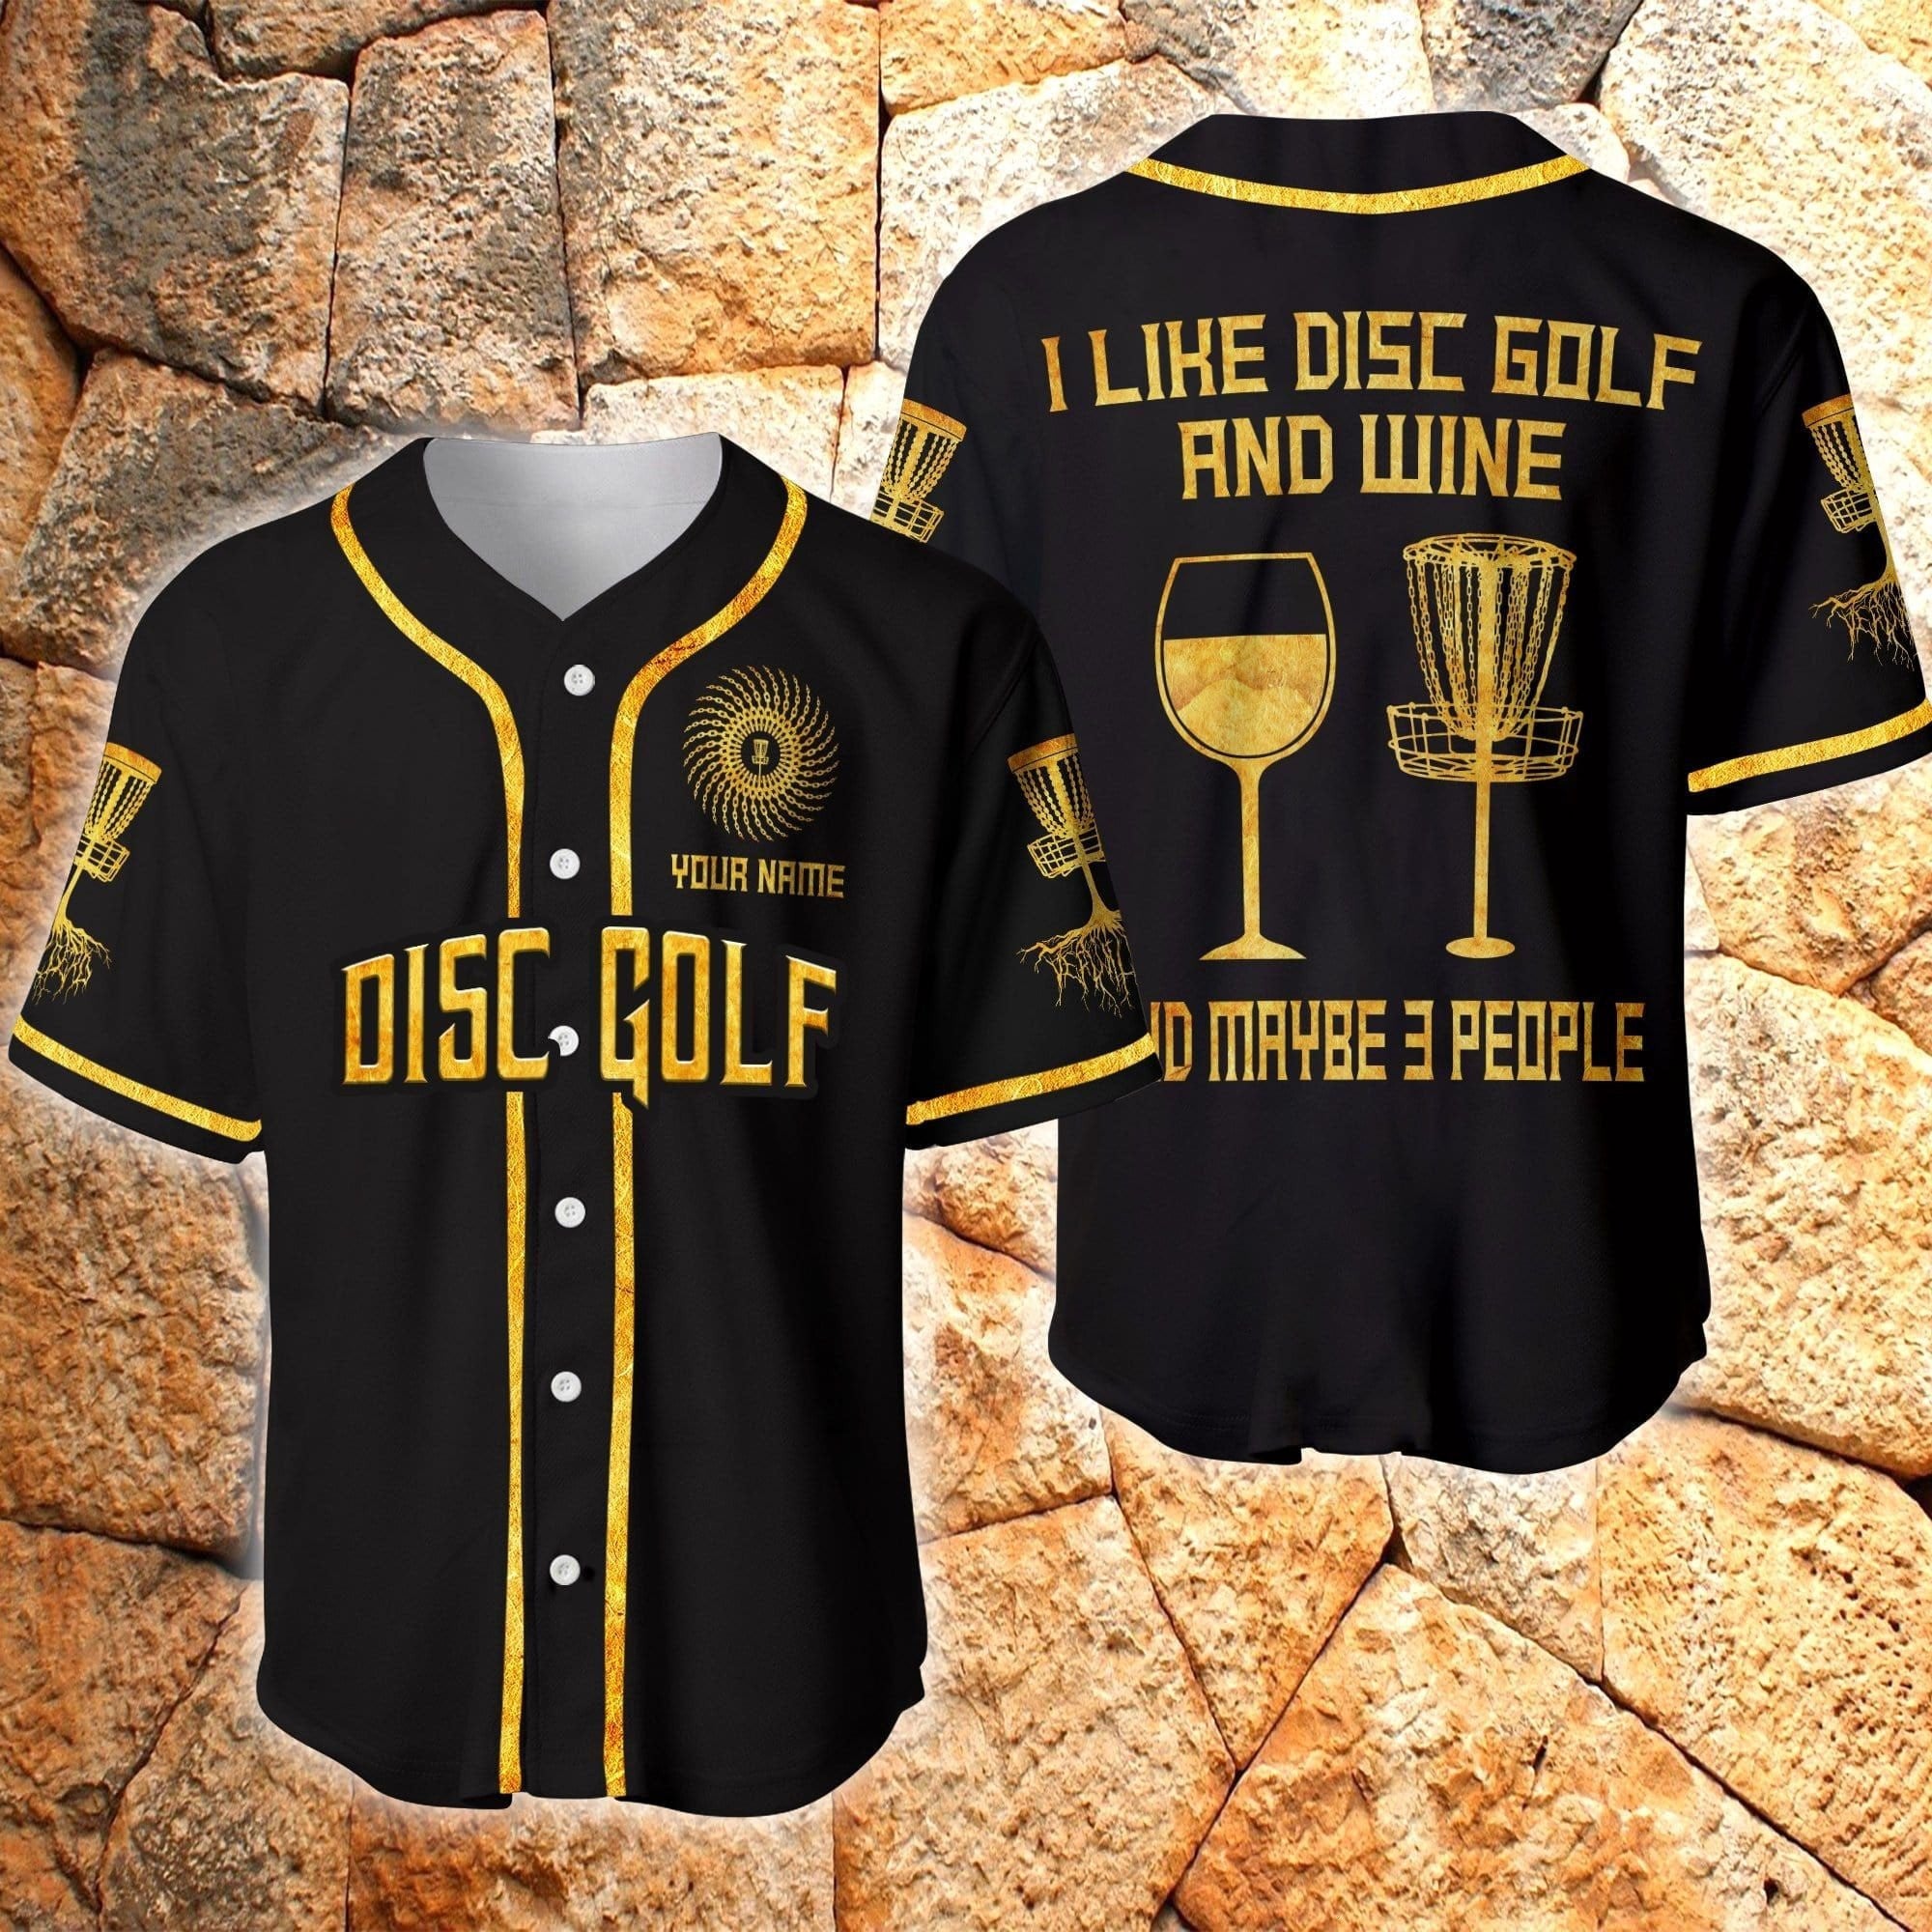 Golf Important Choices Metal Personalized Baseball Jersey/ Idea Gift for Golf Lover